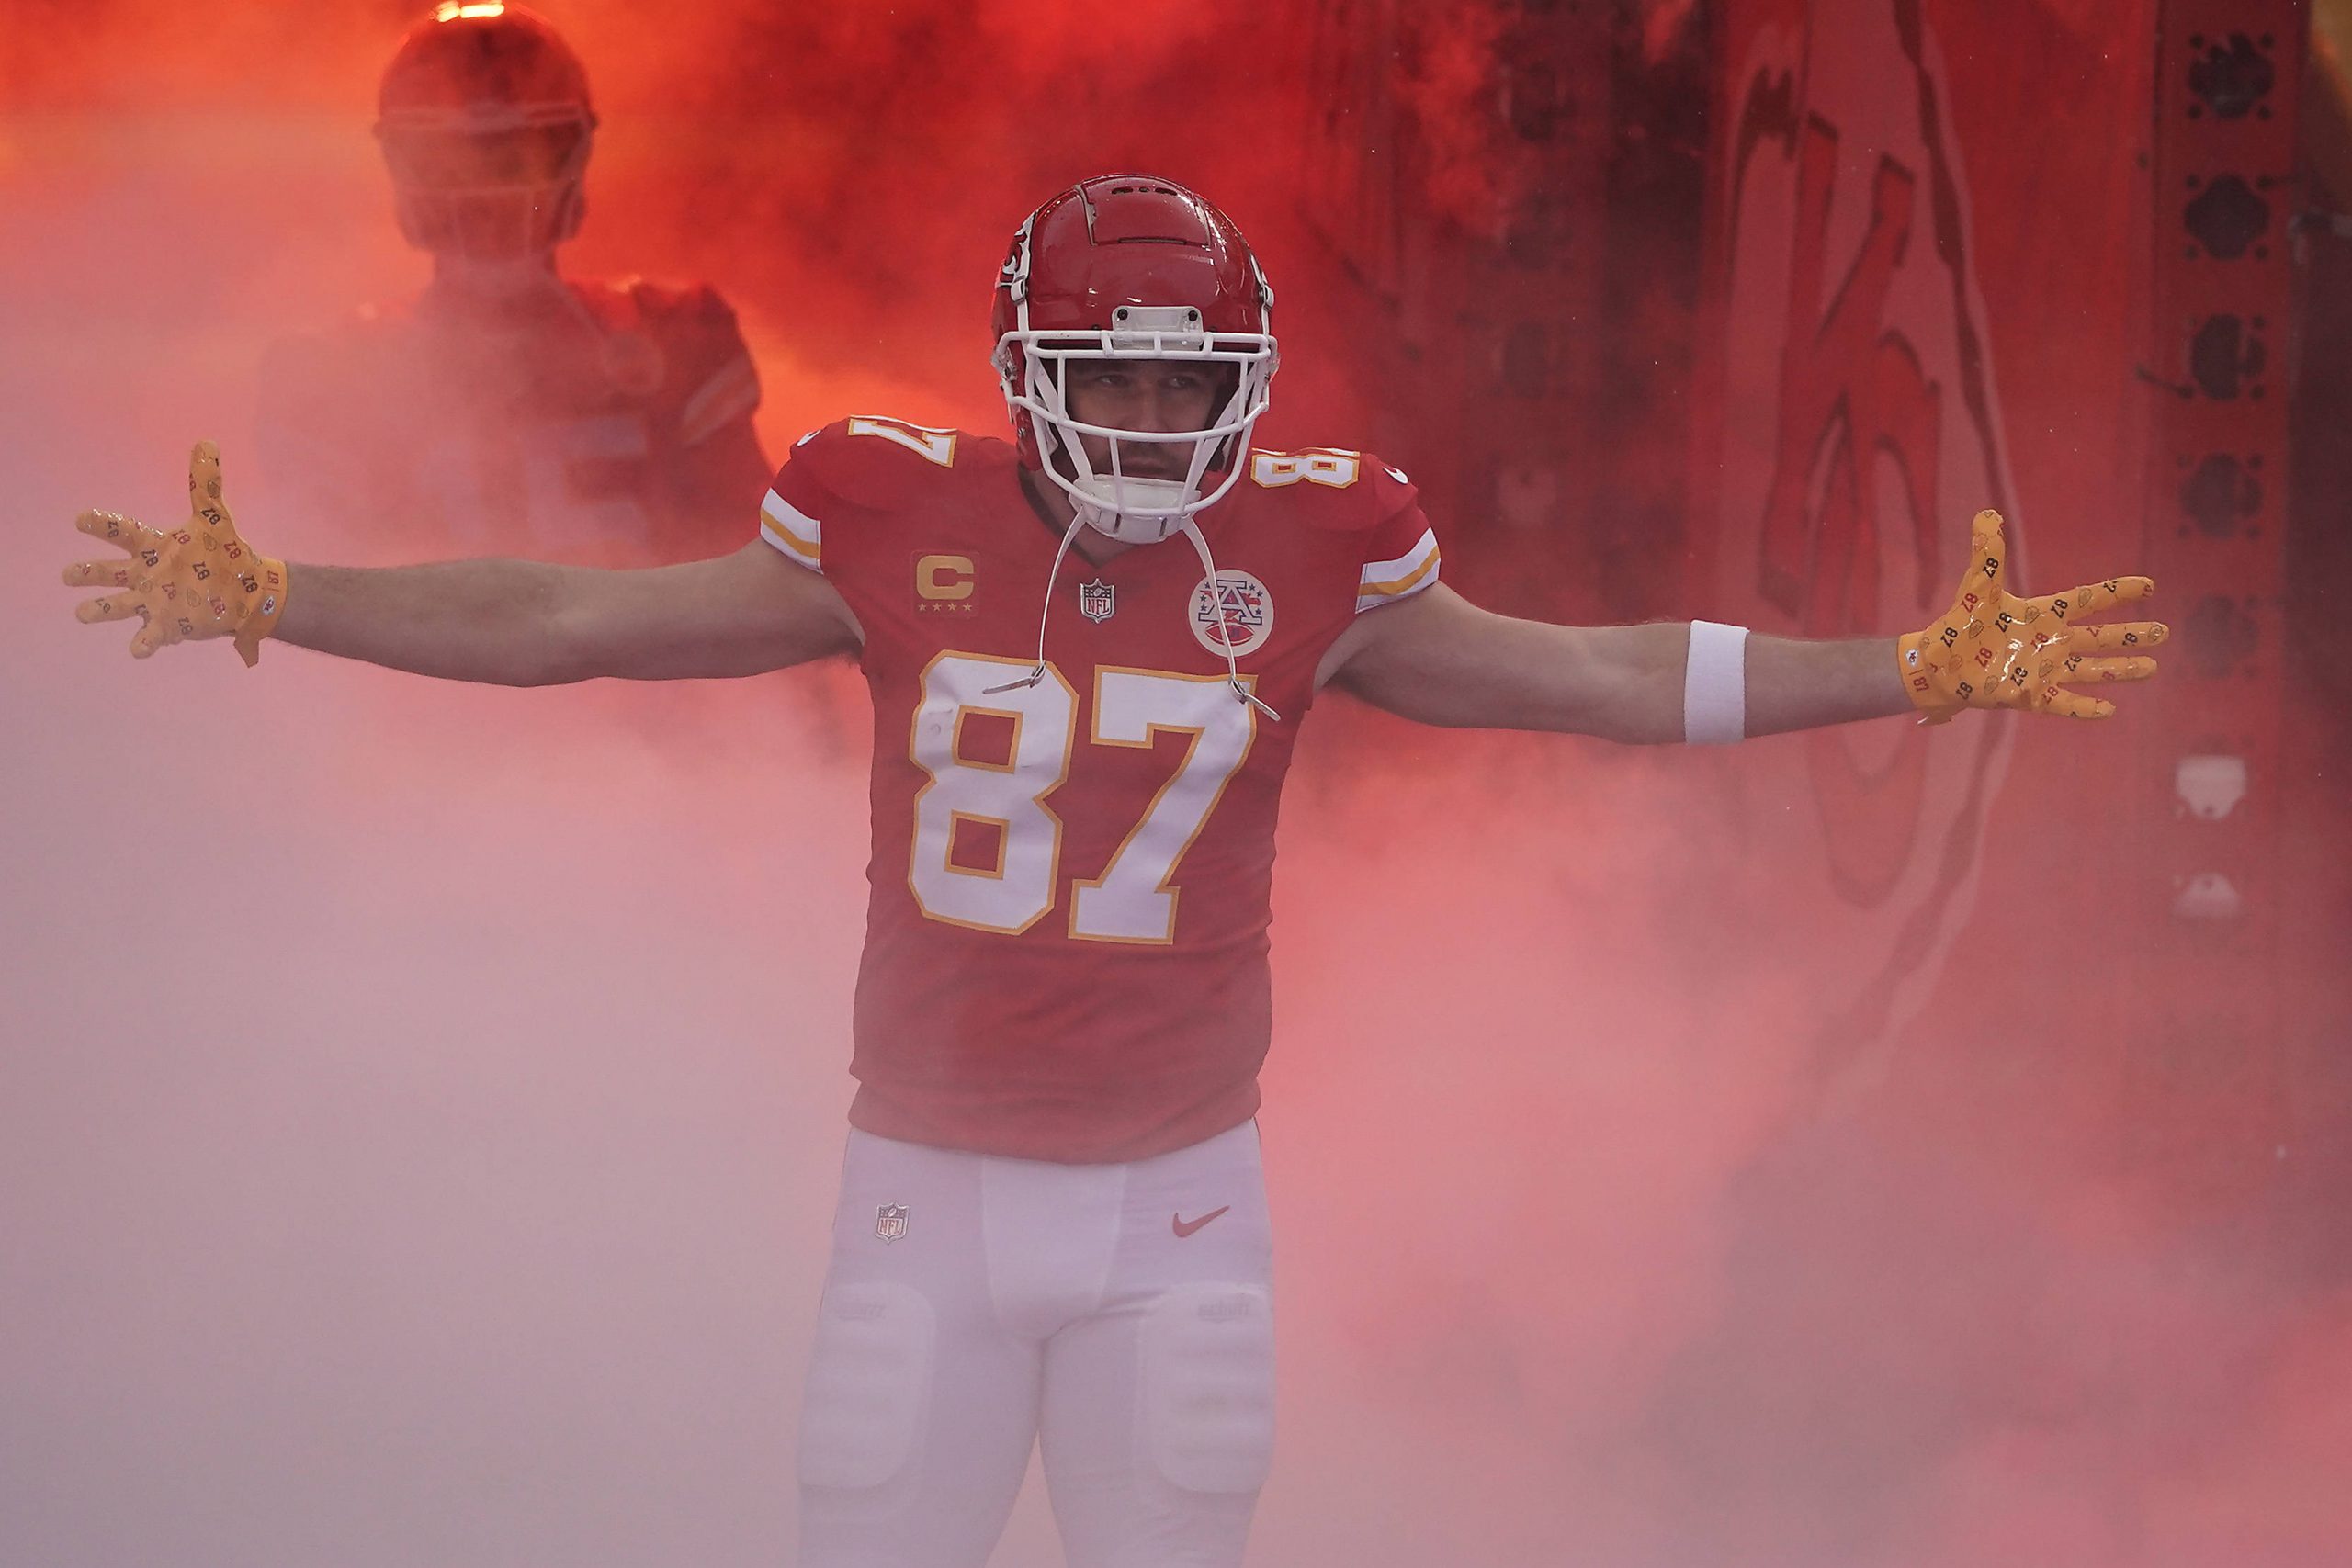 NFL, American Football Herren, USA AFC Divisional Round-Jacksonville Jaguars at Kansas City Chiefs Jan 21, 2023 Kansas City, Missouri, USA Kansas City Chiefs tight end Travis Kelce 87 is introduced before playing against the Jacksonville Jaguars in the AFC divisional round game at GEHA Field at Arrowhead Stadium. Kansas City GEHA Field at Arrowhead Stadium Missouri USA, EDITORIAL USE ONLY PUBLICATIONxINxGERxSUIxAUTxONLY Copyright: xDennyxMedleyx 20230121_gav_sm8_019